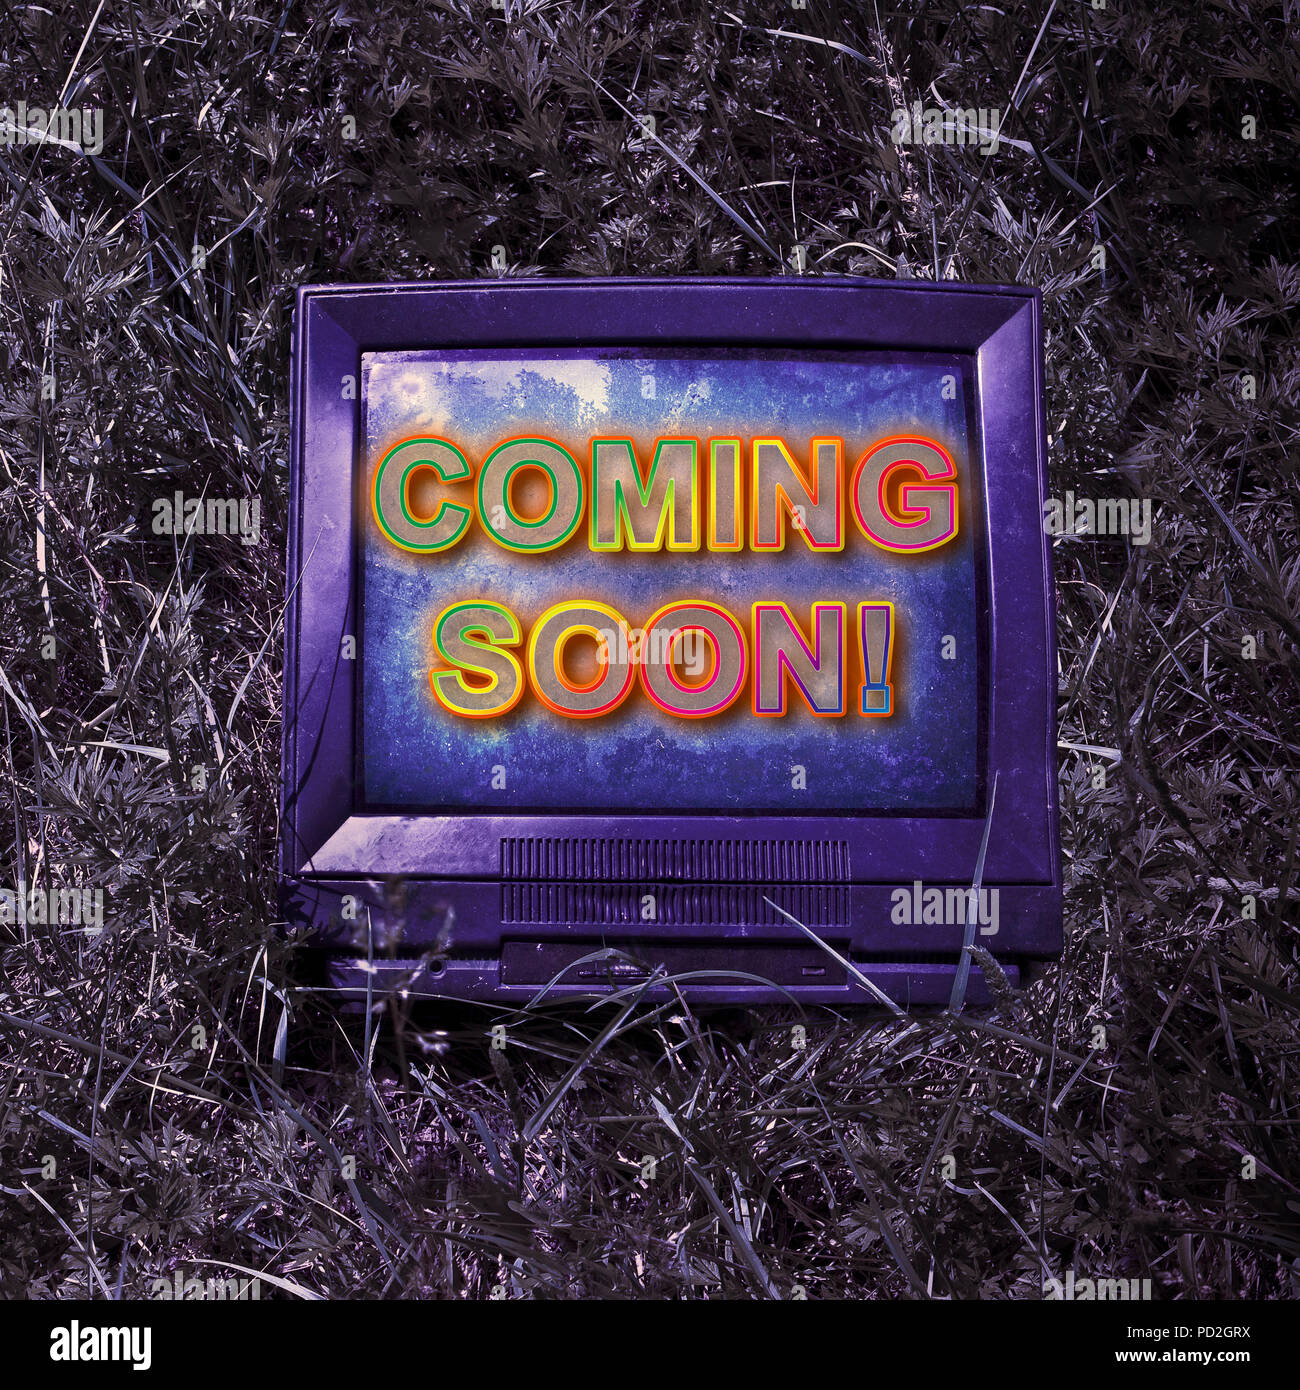 Coming soon concept written on an screen of an old CRT  (Cathode ray tube) television - toned image Stock Photo